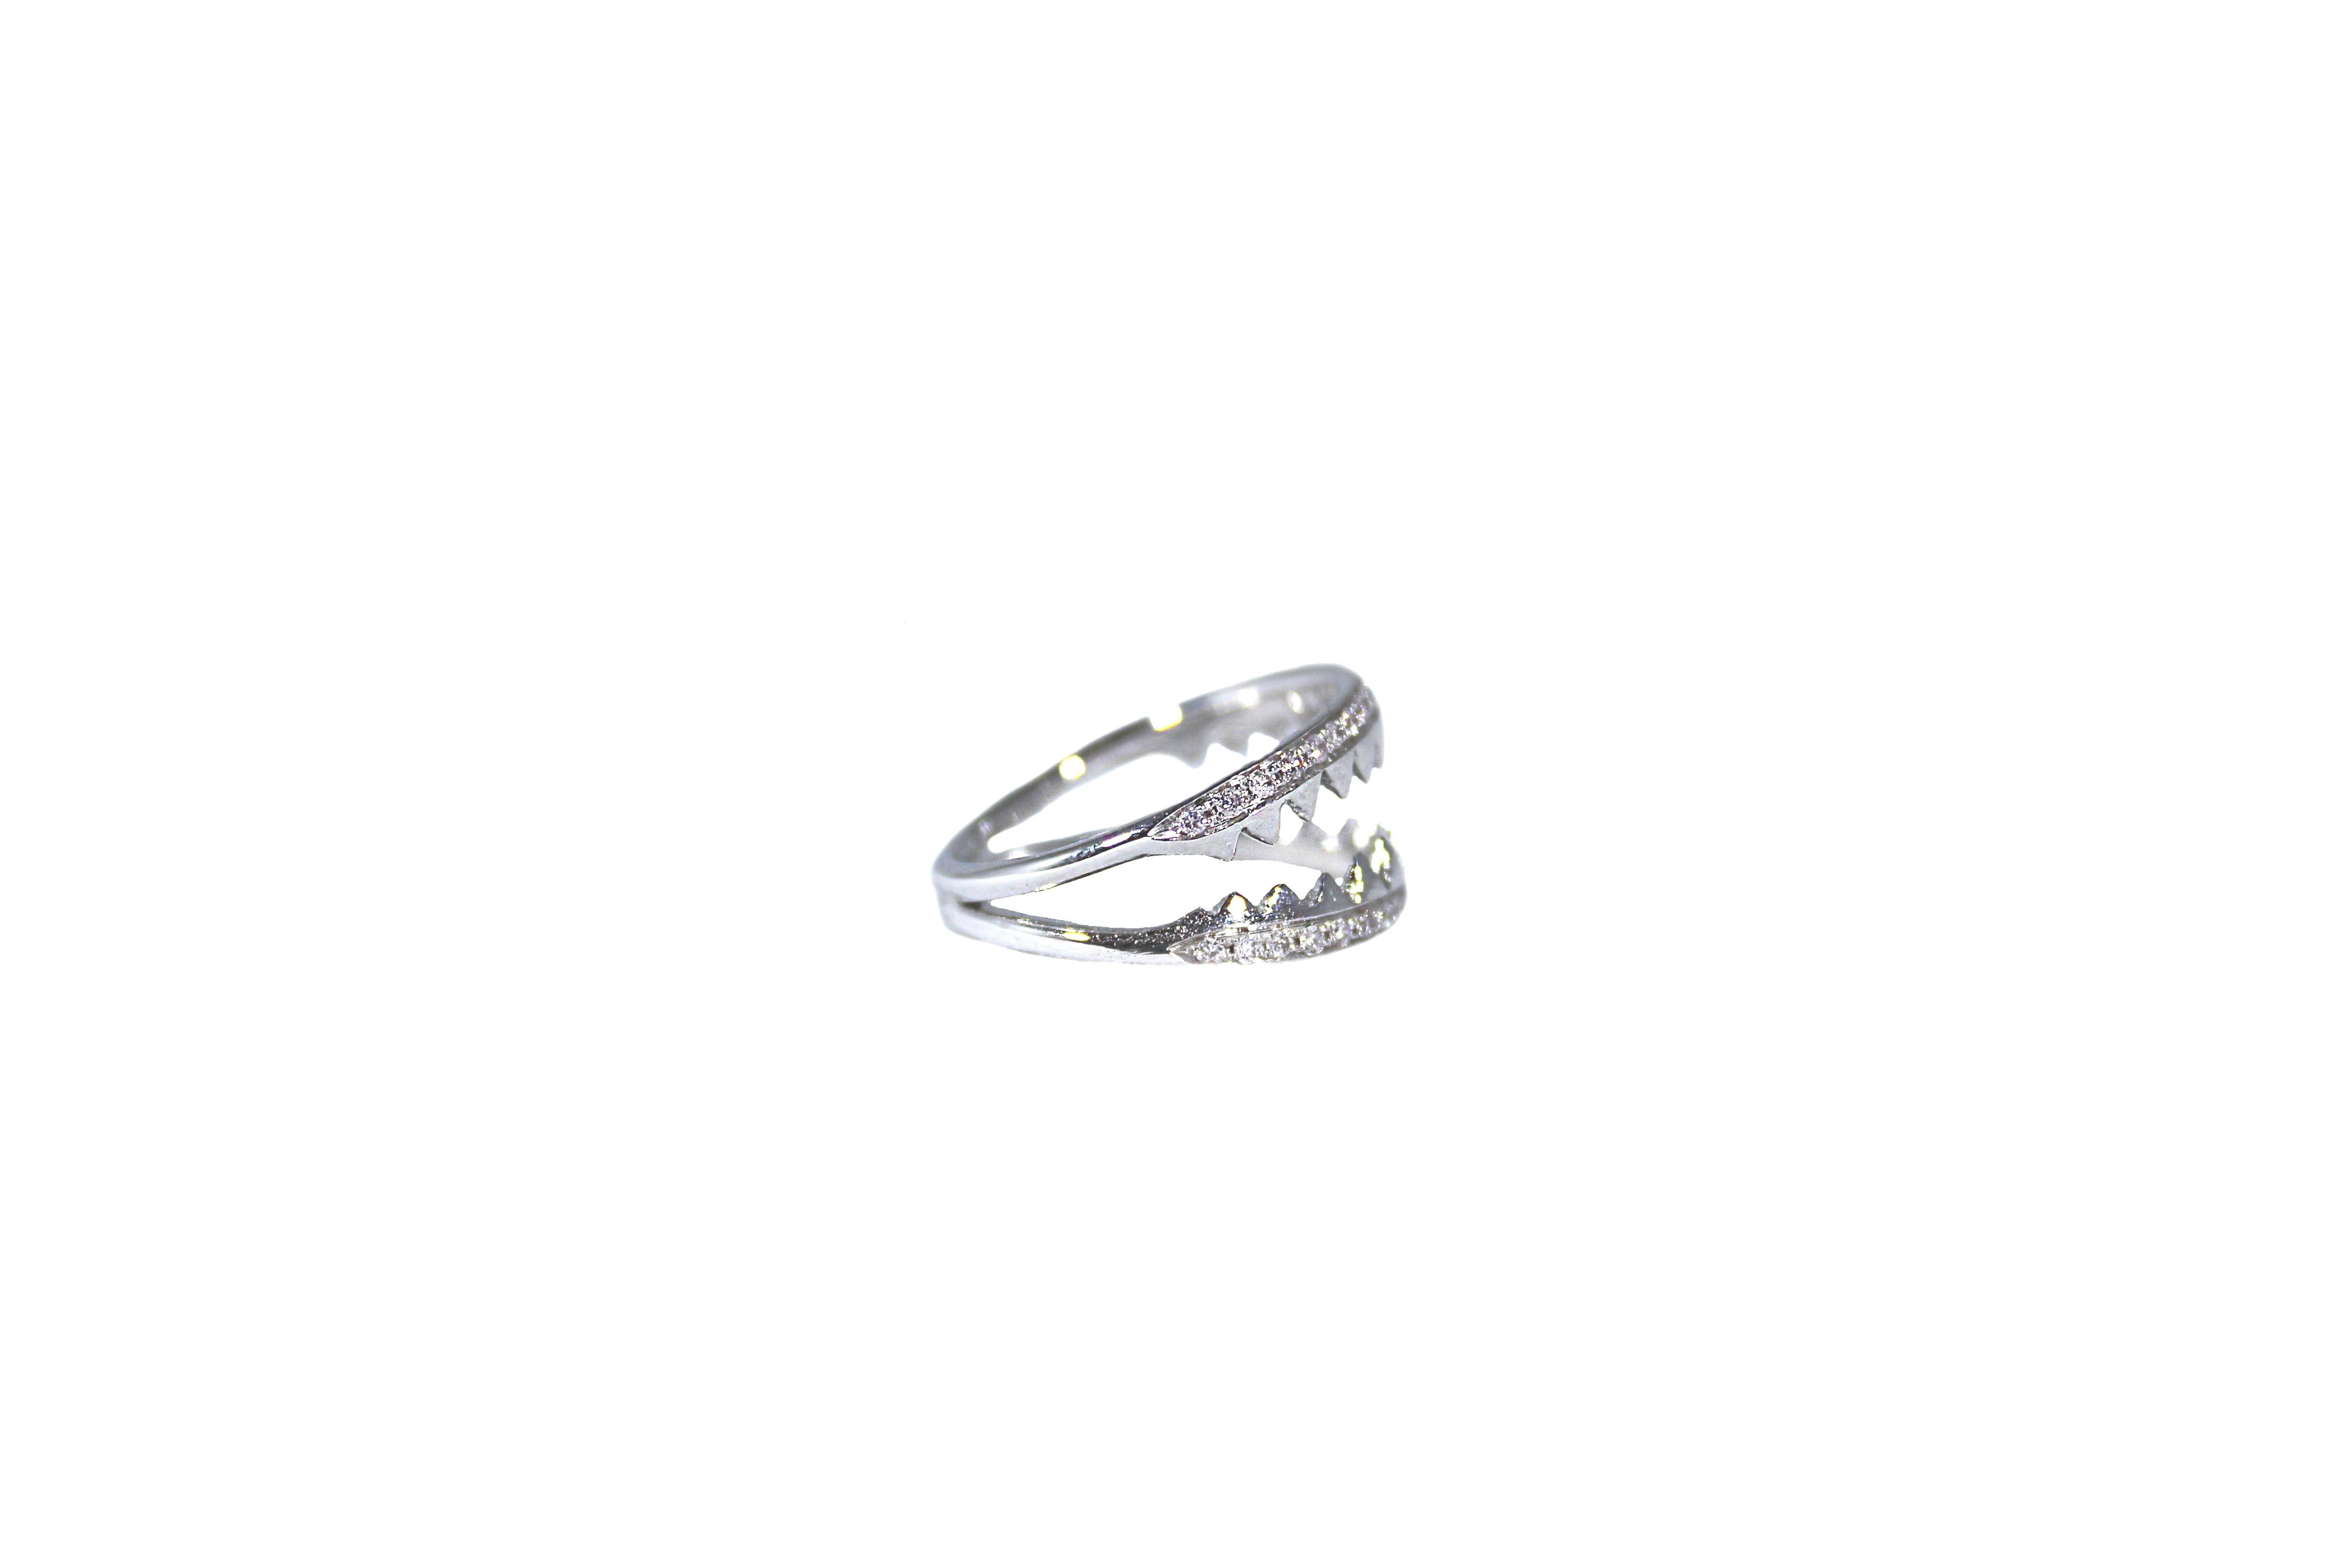 Shark jaws white gold ring with pavé diamonds.

Composition:
Gold 3,90 gr (18K)
40 diamonds 0,31 ct

Size is adjustable from 5 2/4 US to 5 3/4 US ( italian size from 12 to 11 )
Other sizes on demand, working time approx 15 days.
